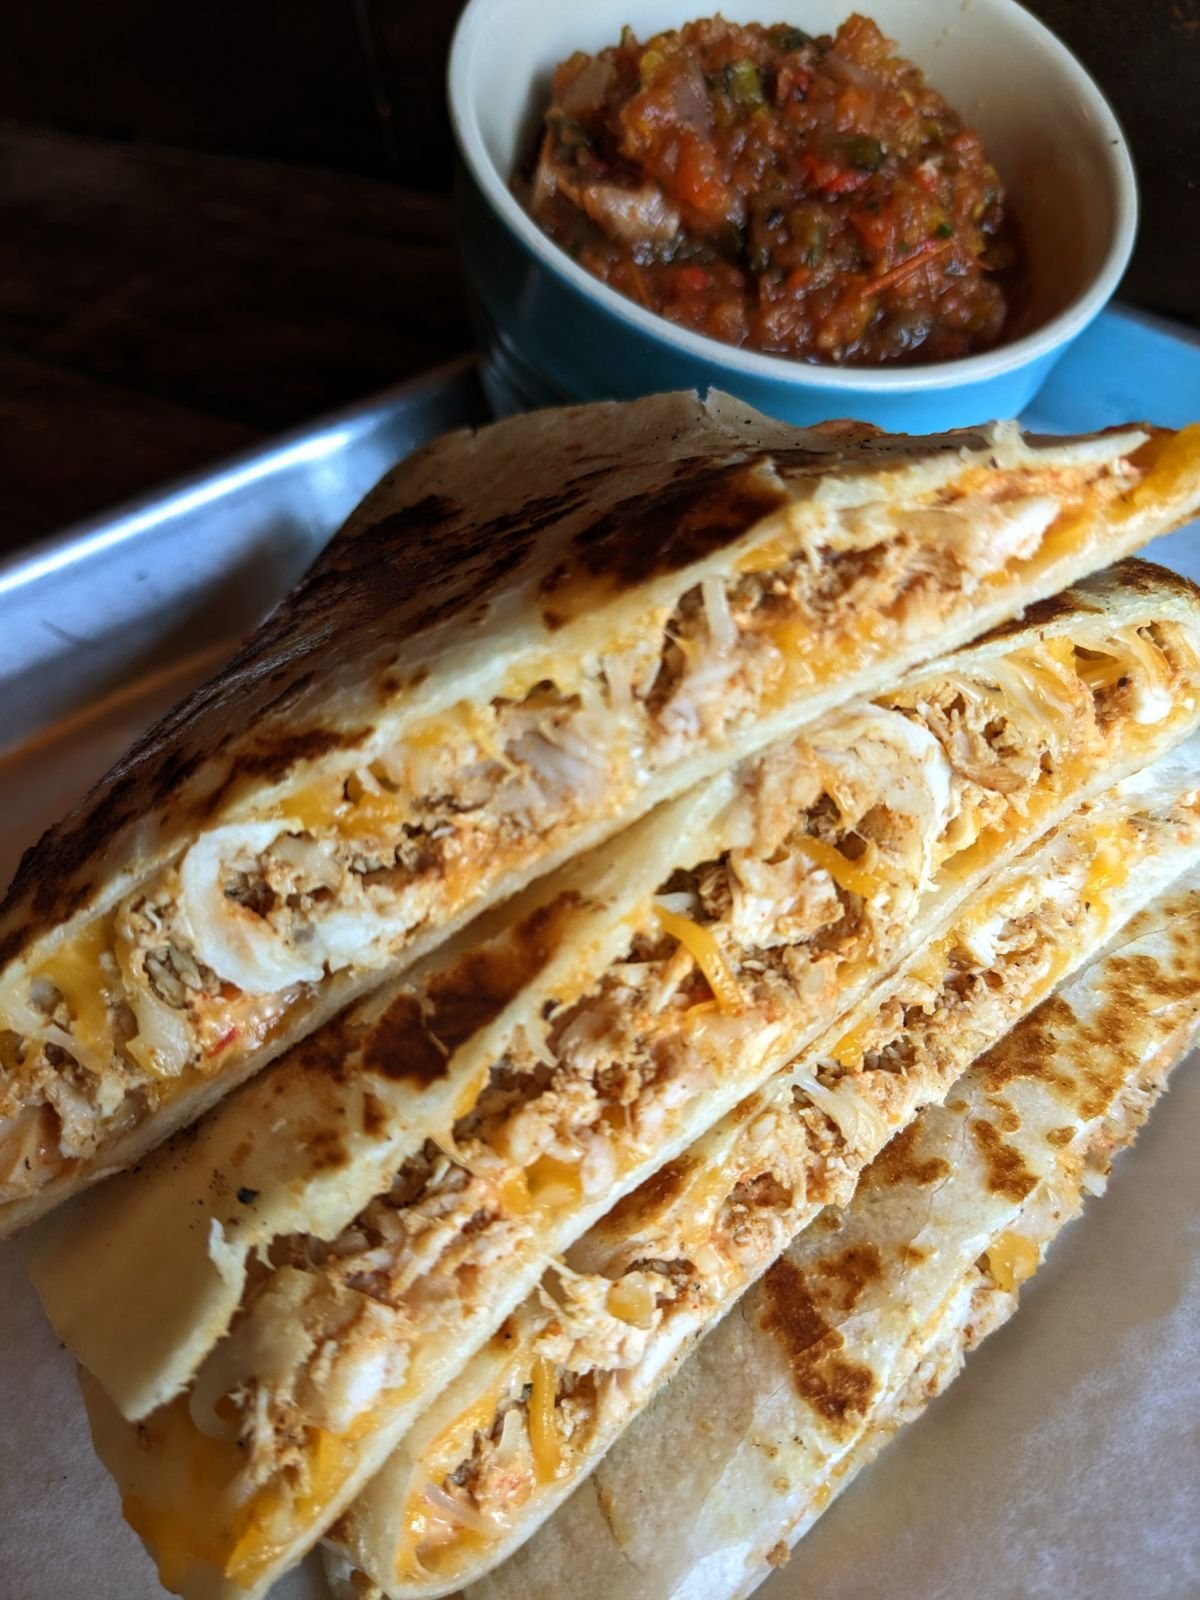 MONDAY (4/29) SMOKEHOUSE SPECIAL
ALL DAY- - - Smoked chicken quesadilla, cheddar jack cheese, chipotle crema, served with salsa roja

#smokemeateveryday #weeklyspecials #AlamanceNC #SmokeEverything #southernfoodie